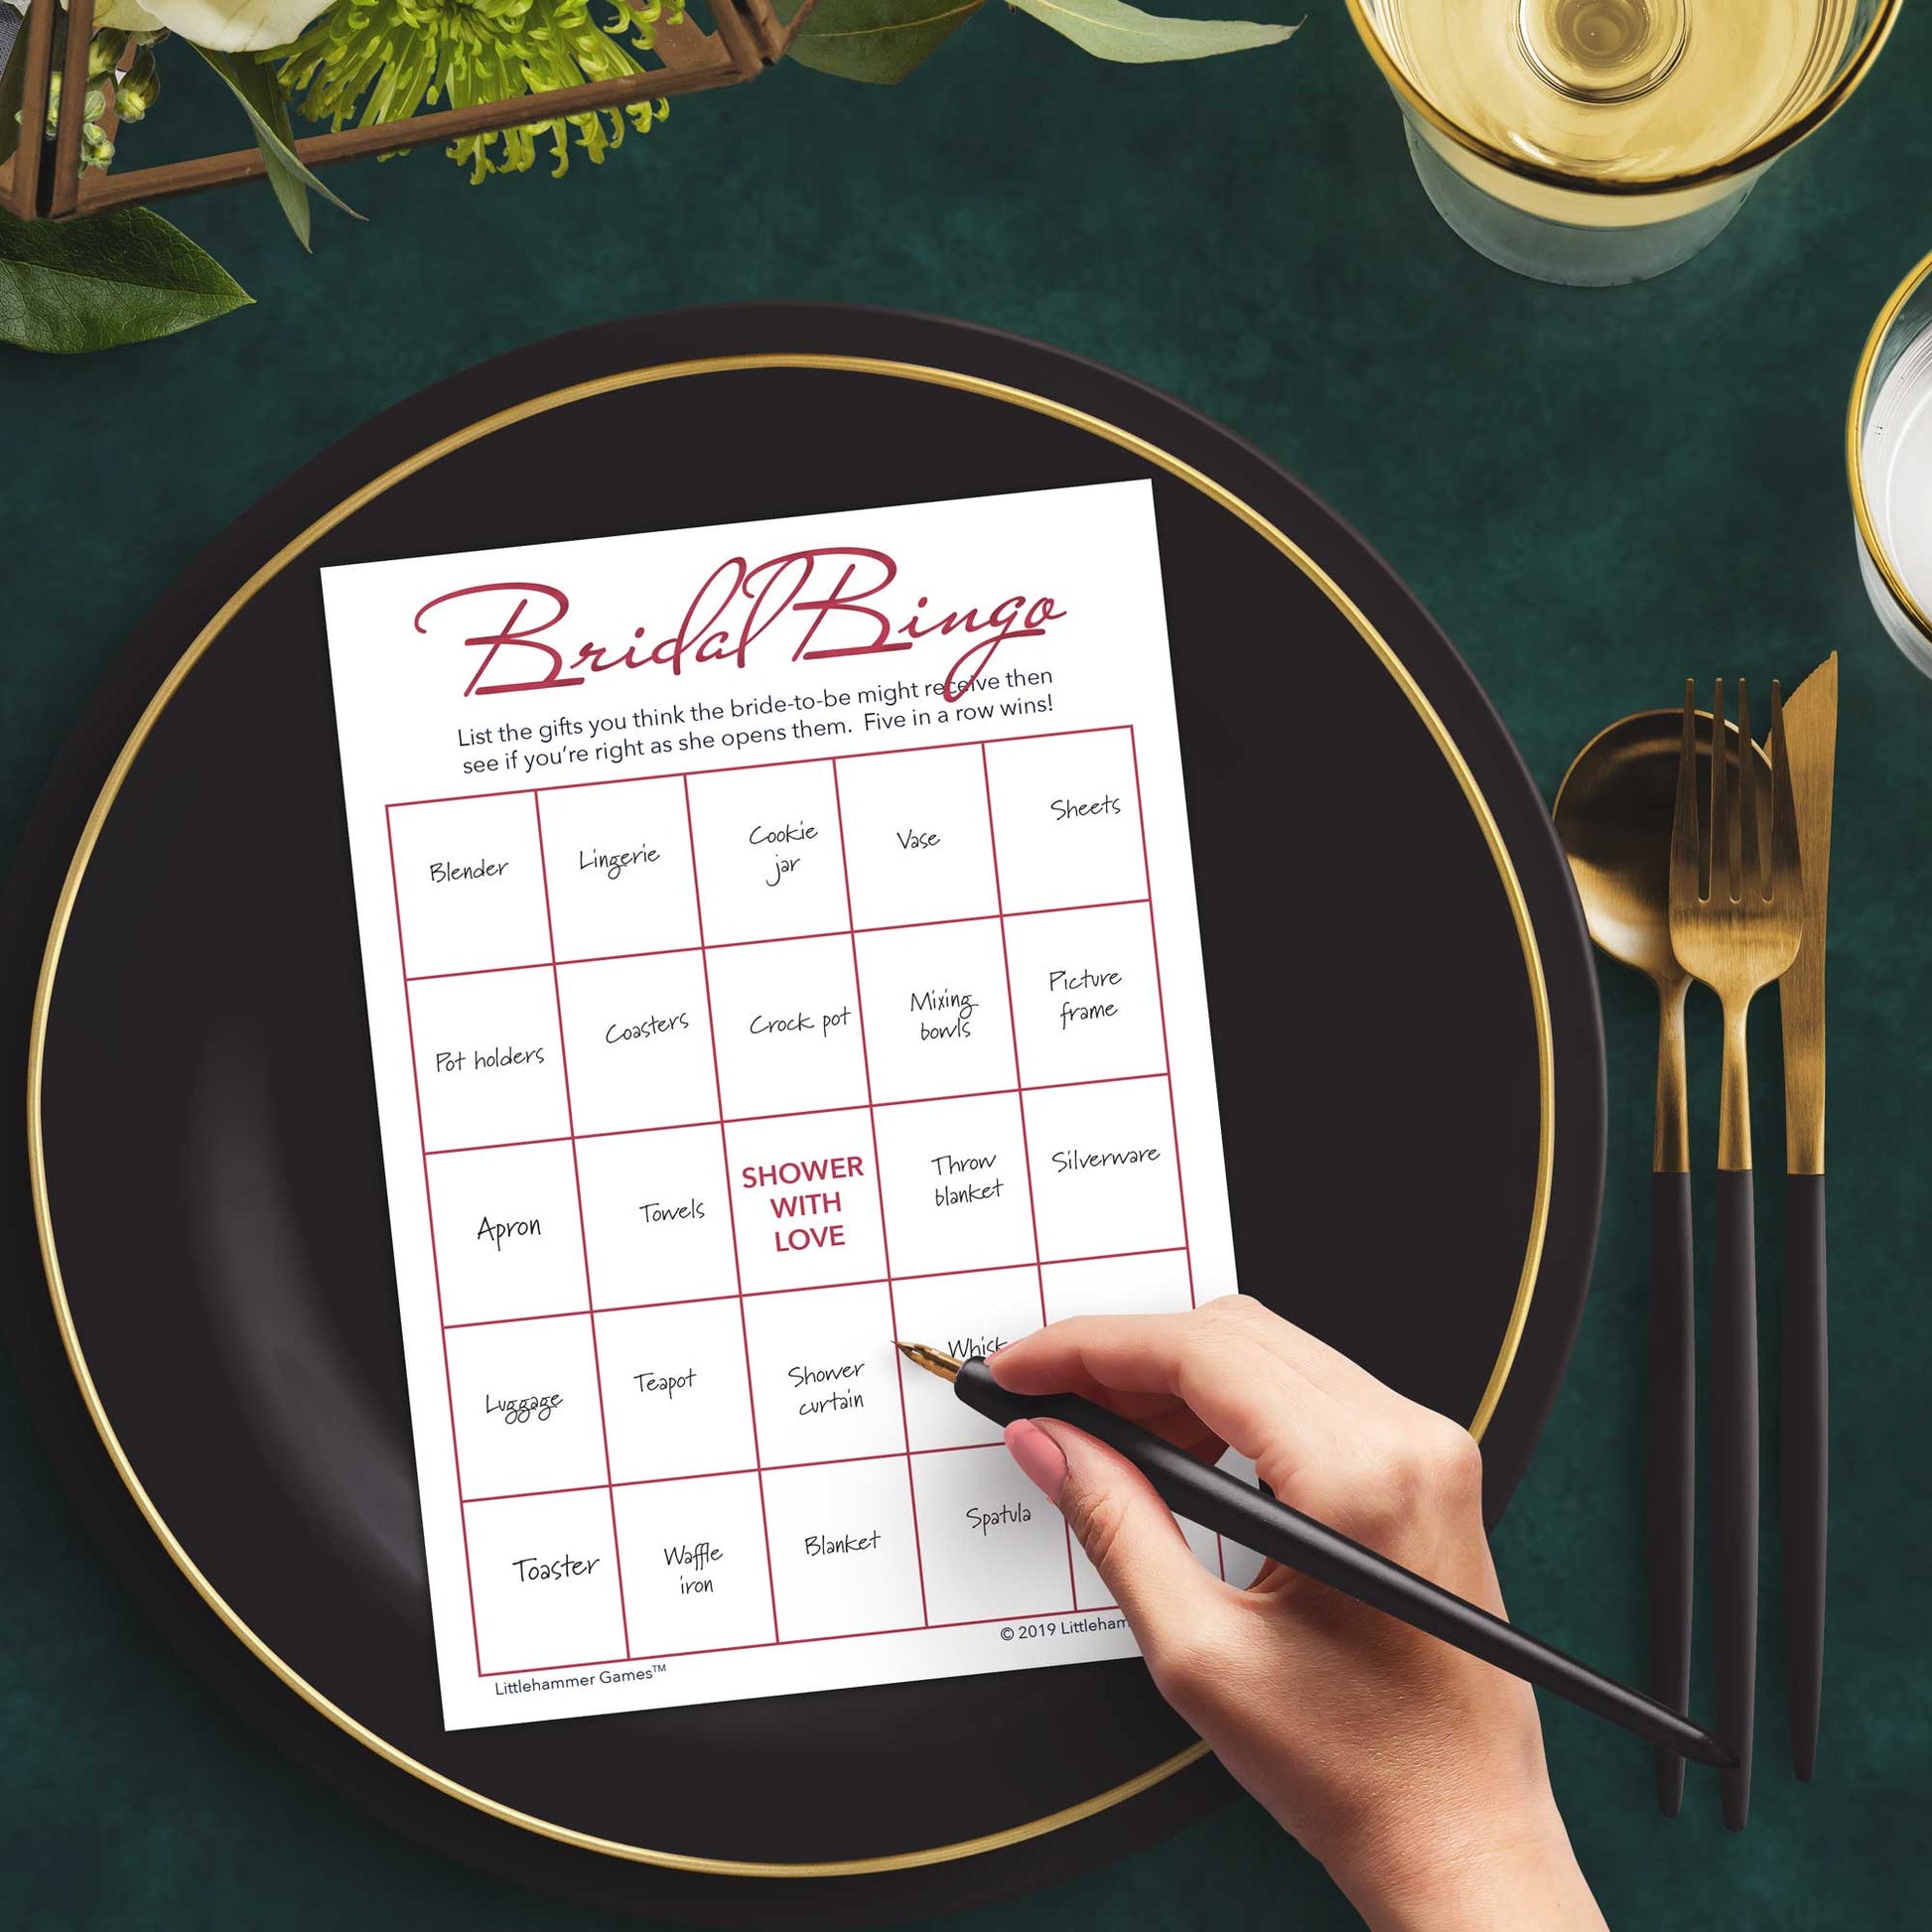 Woman with a pen sitting at a dark place setting with a black and gold plate filling out a rose gold and white Bridal Gift Bingo card